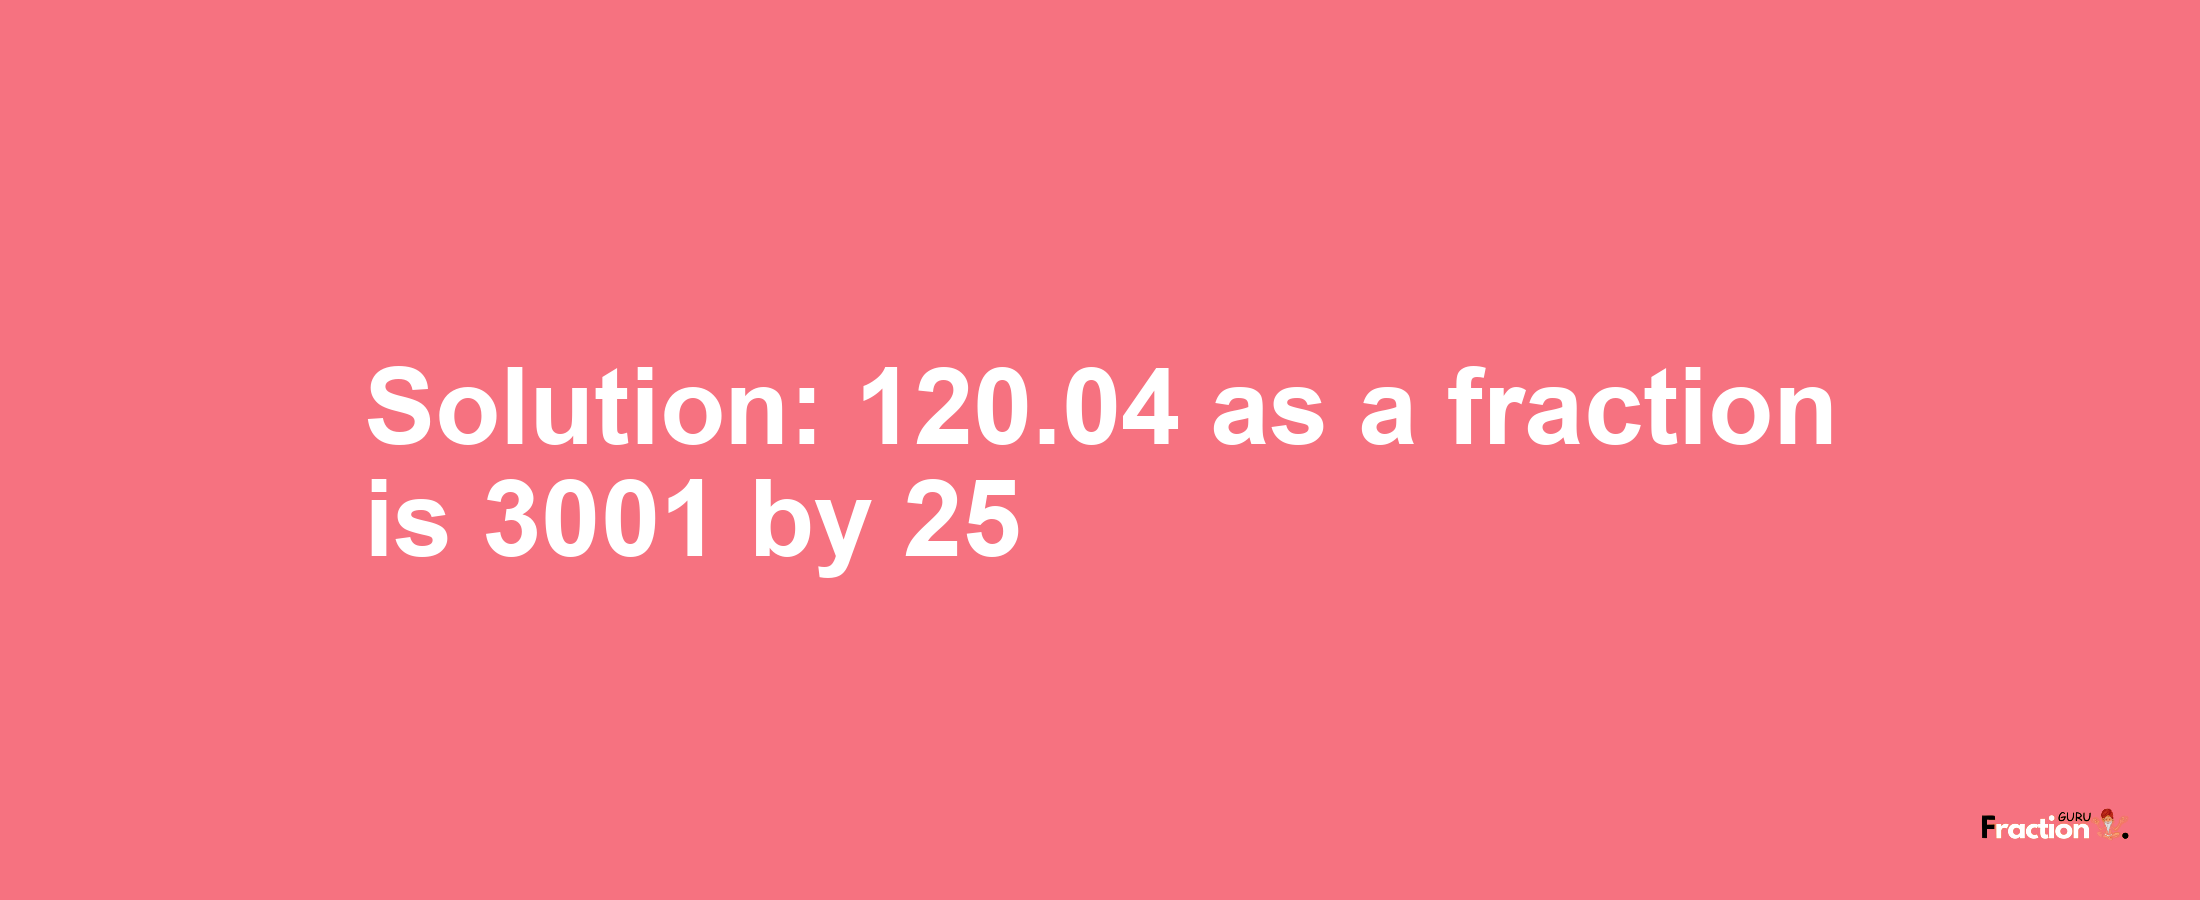 Solution:120.04 as a fraction is 3001/25